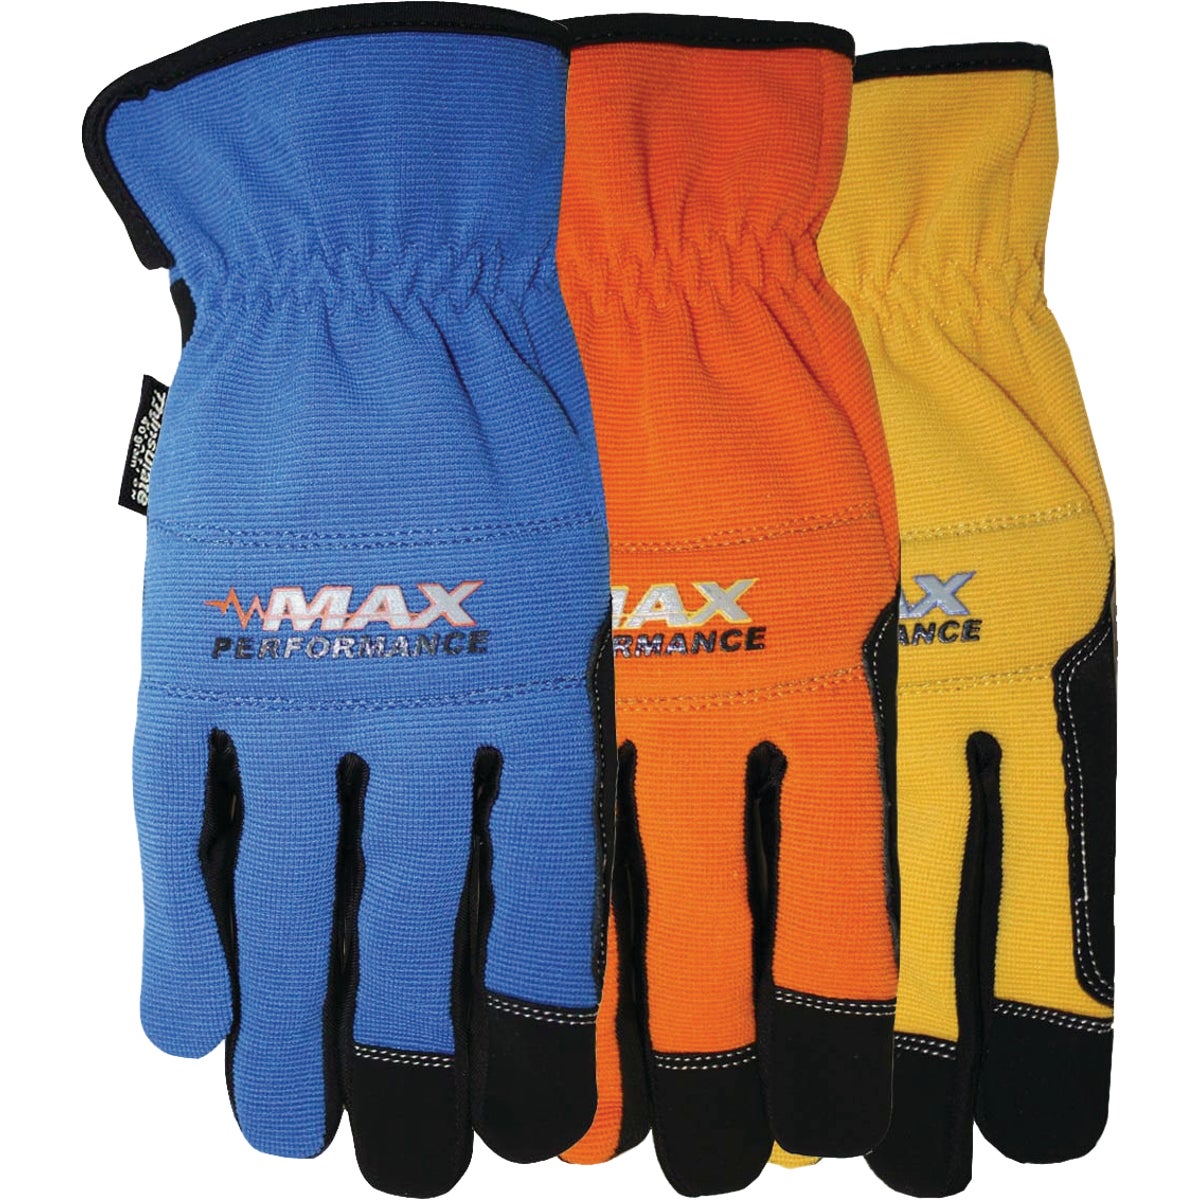 Midwest Gloves & Gear Max Performance Men's Large Thinsulate Lined Work Glove